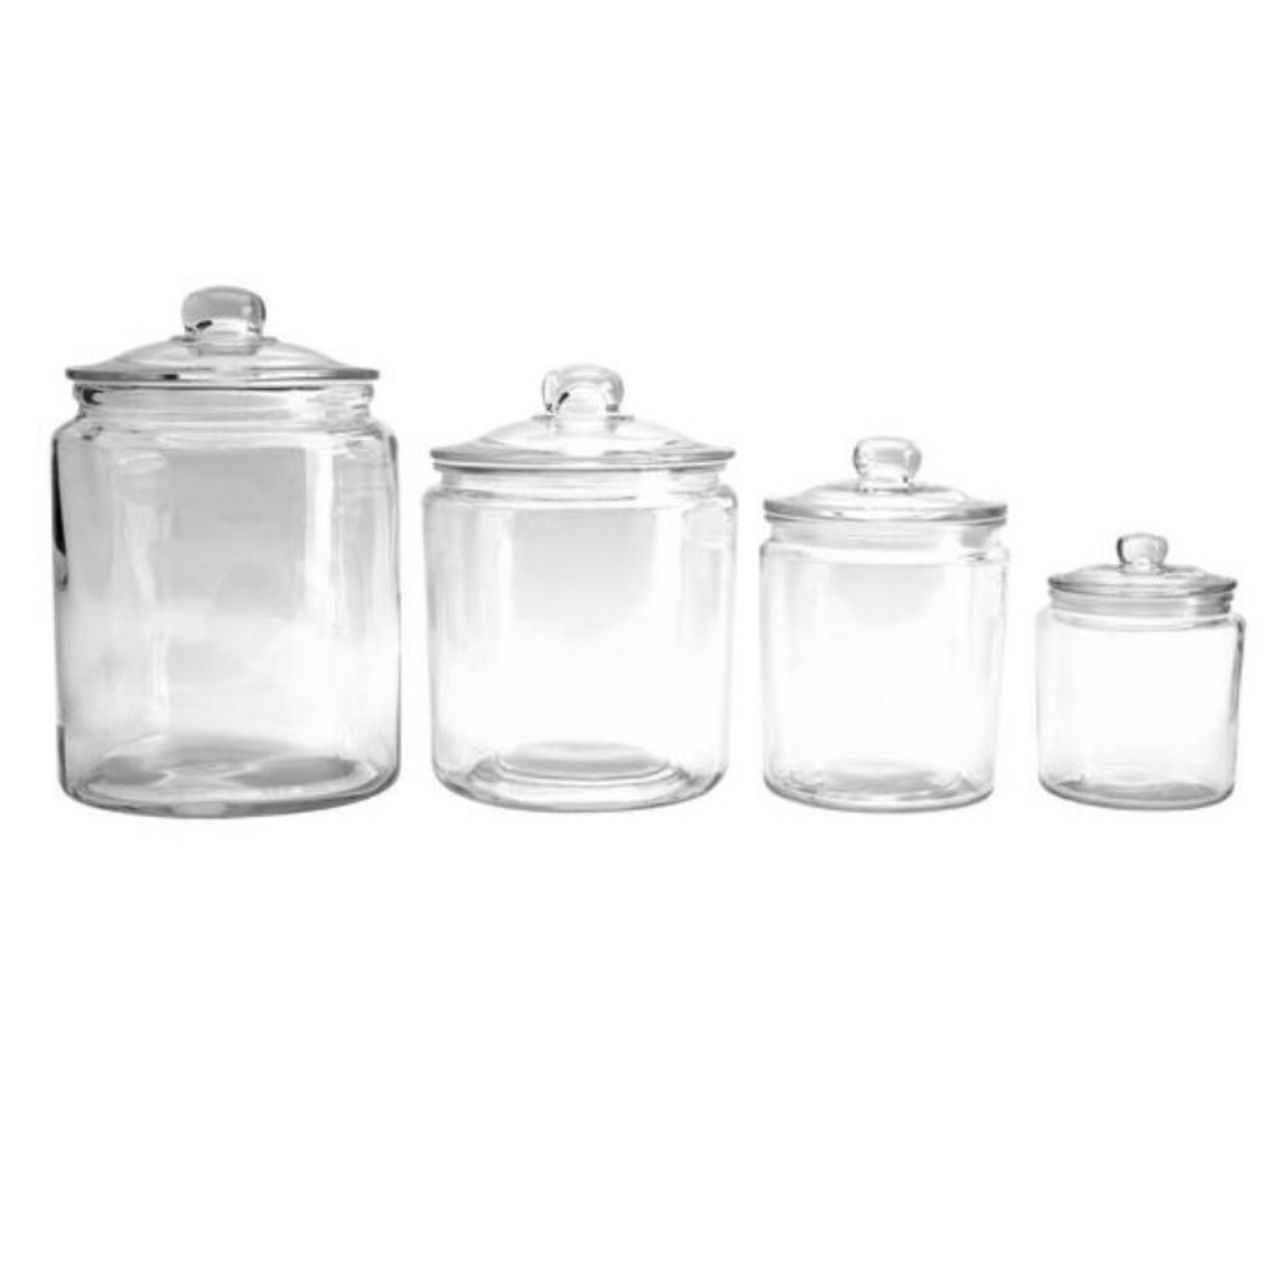 Mason Craft & More Jars/Canisters Set Of 4 (New)